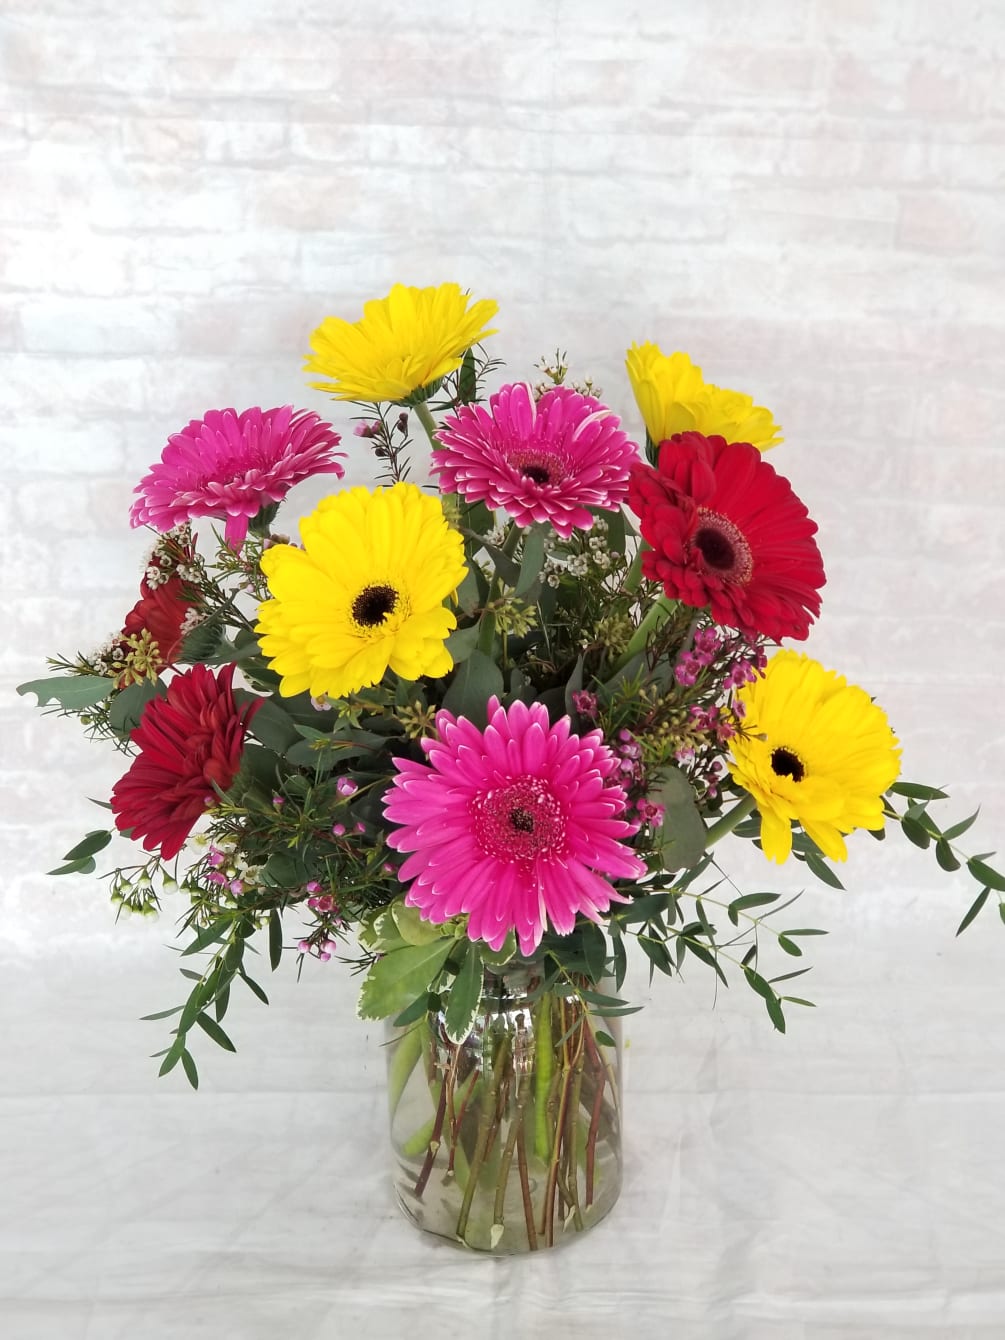 Select this bright and fun arrangement of gerbera daisies in a clear